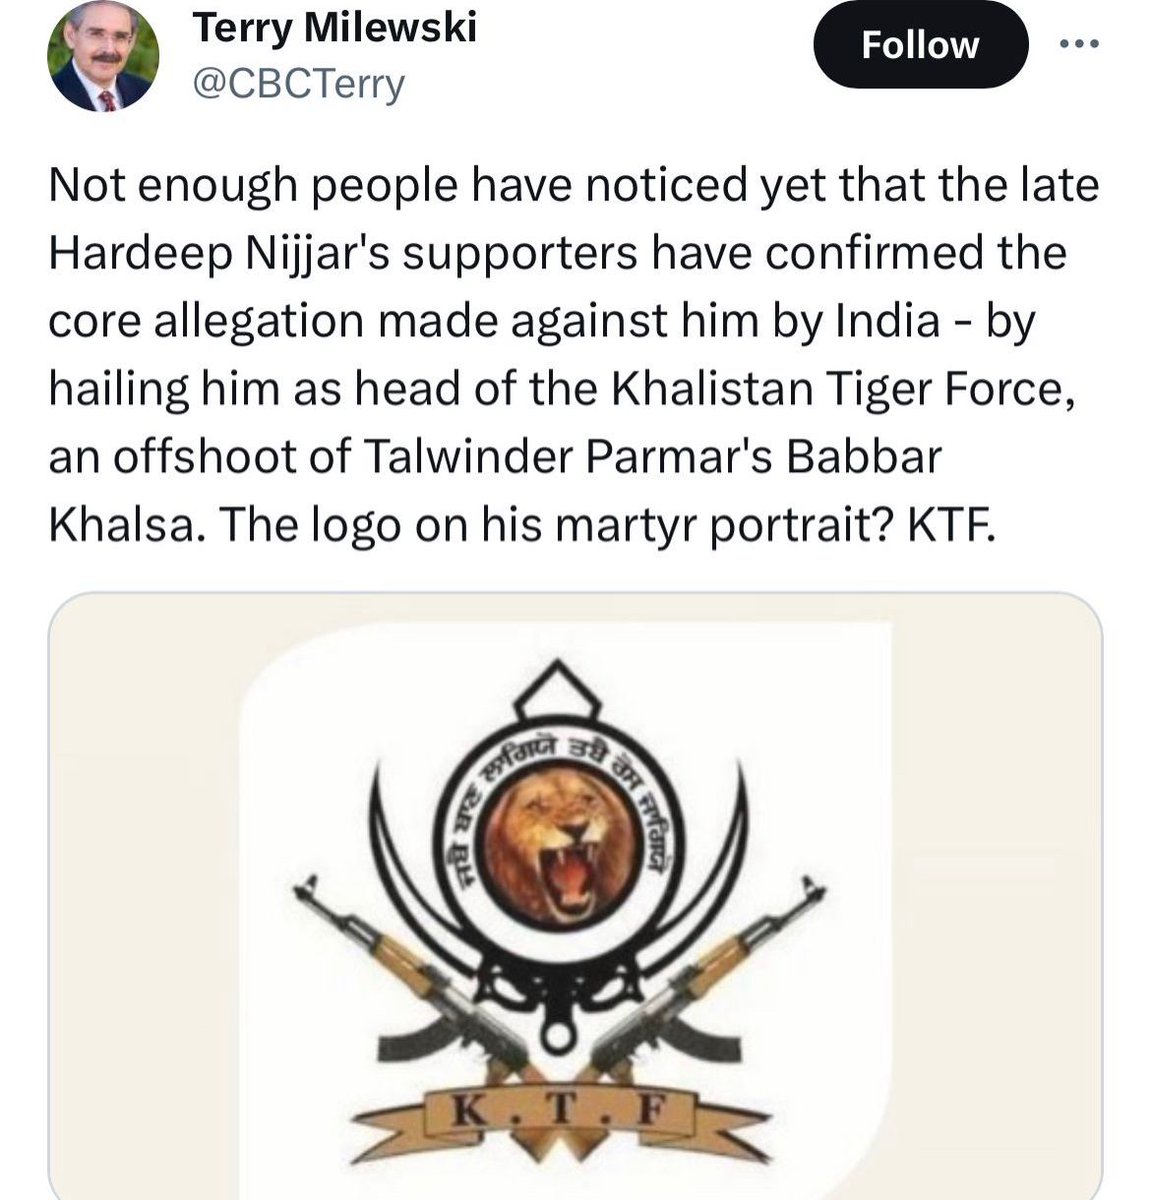 This can make anyone understand the links of Nijjar with terrorism and his association with #KhalistaniTerrorism except @JustinTrudeau. #KhalistaniPuppetTrudeau